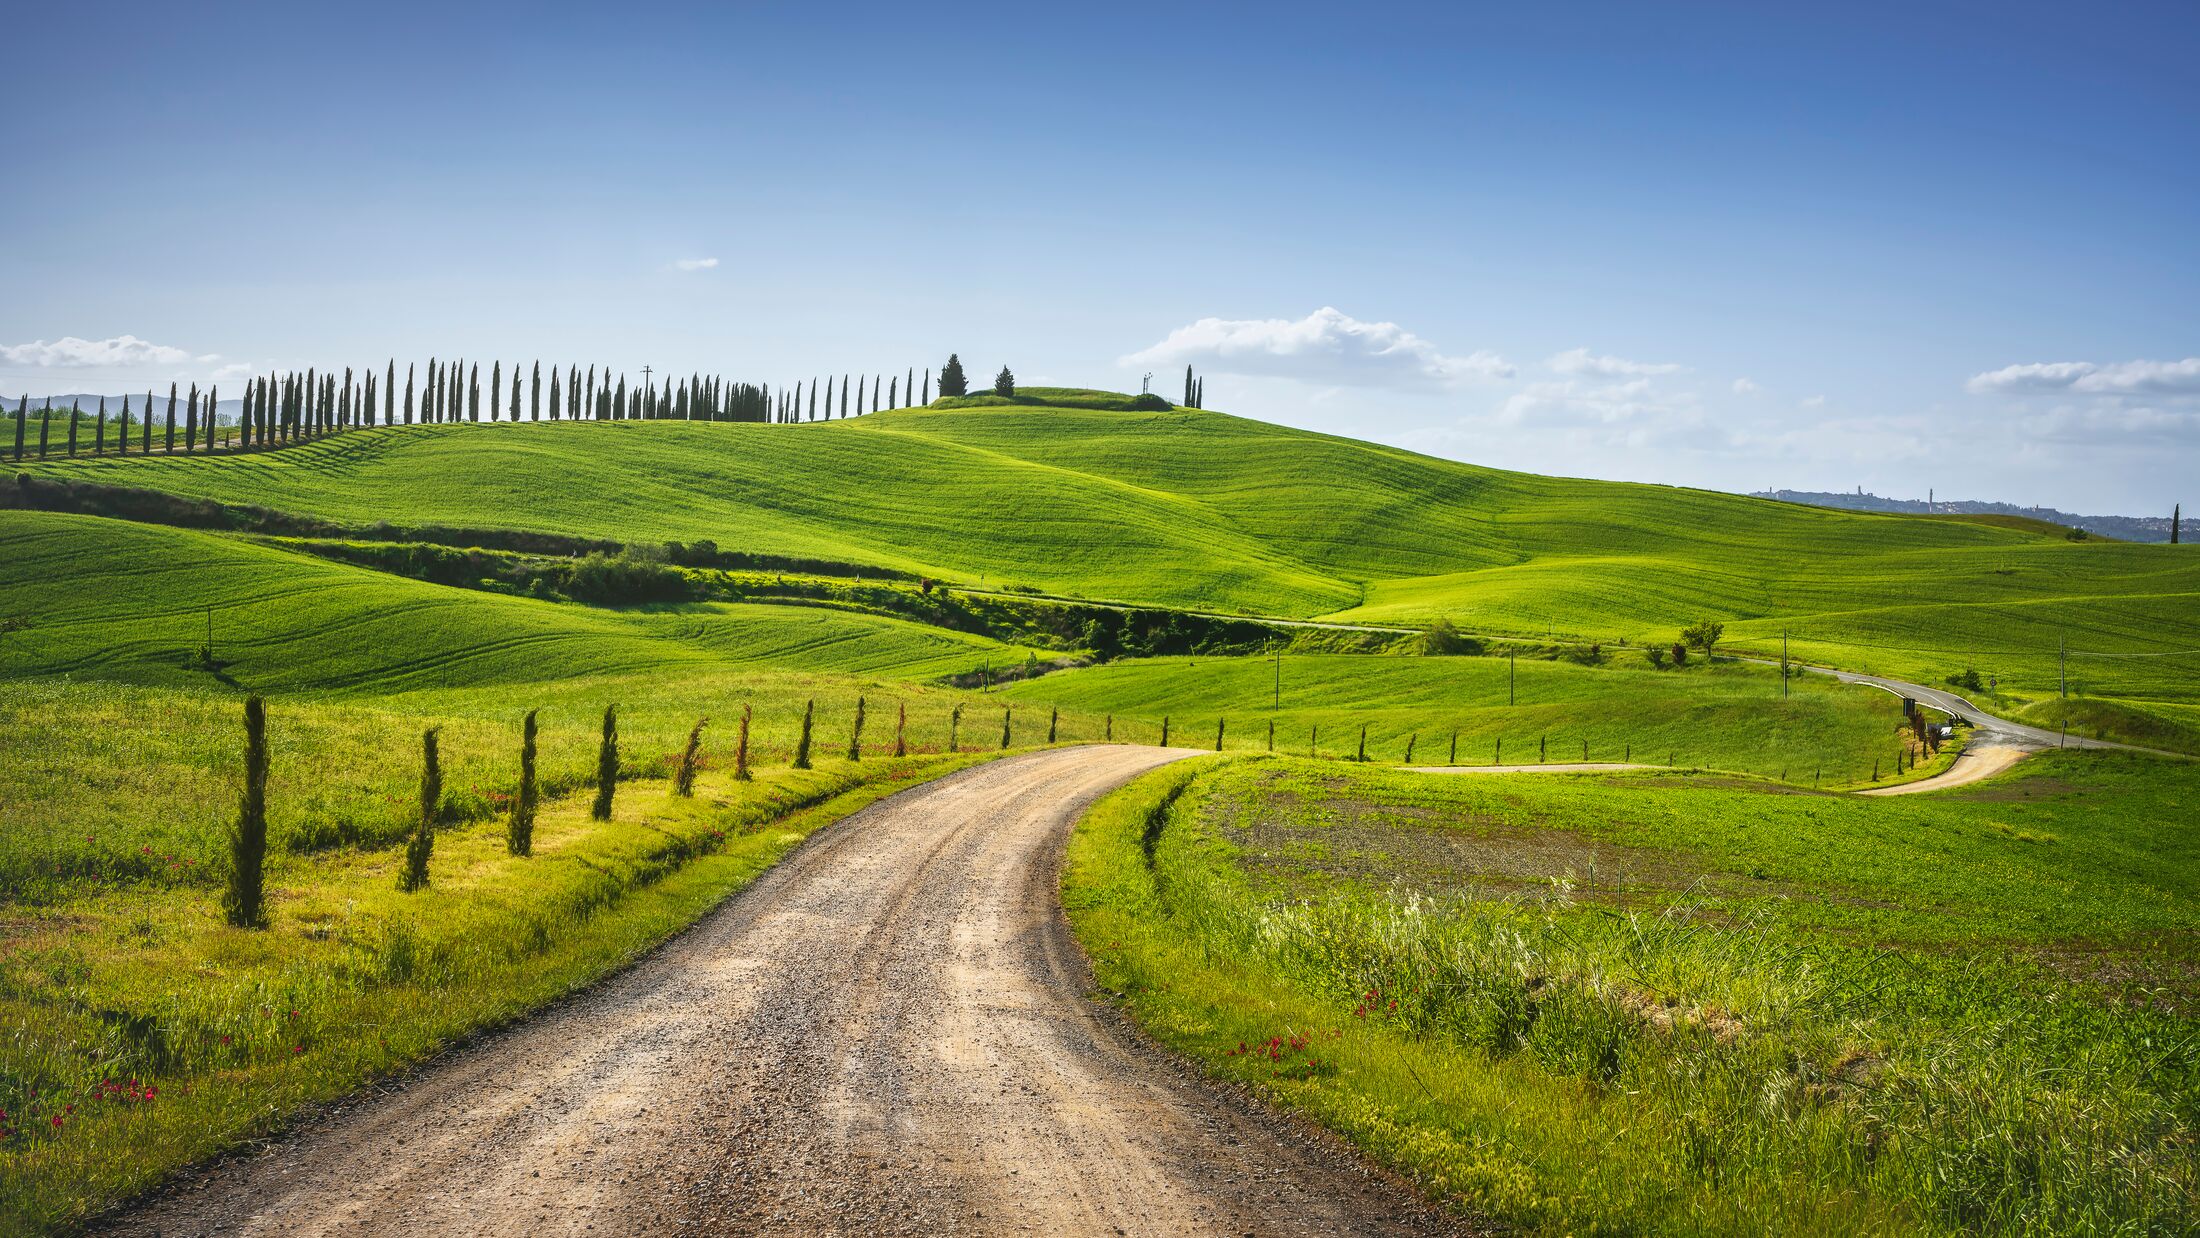 Monteroni d'Arbia, route of the via francigena. Curved road, Field and trees. Siena on background, Tuscany. Italy, Europe.